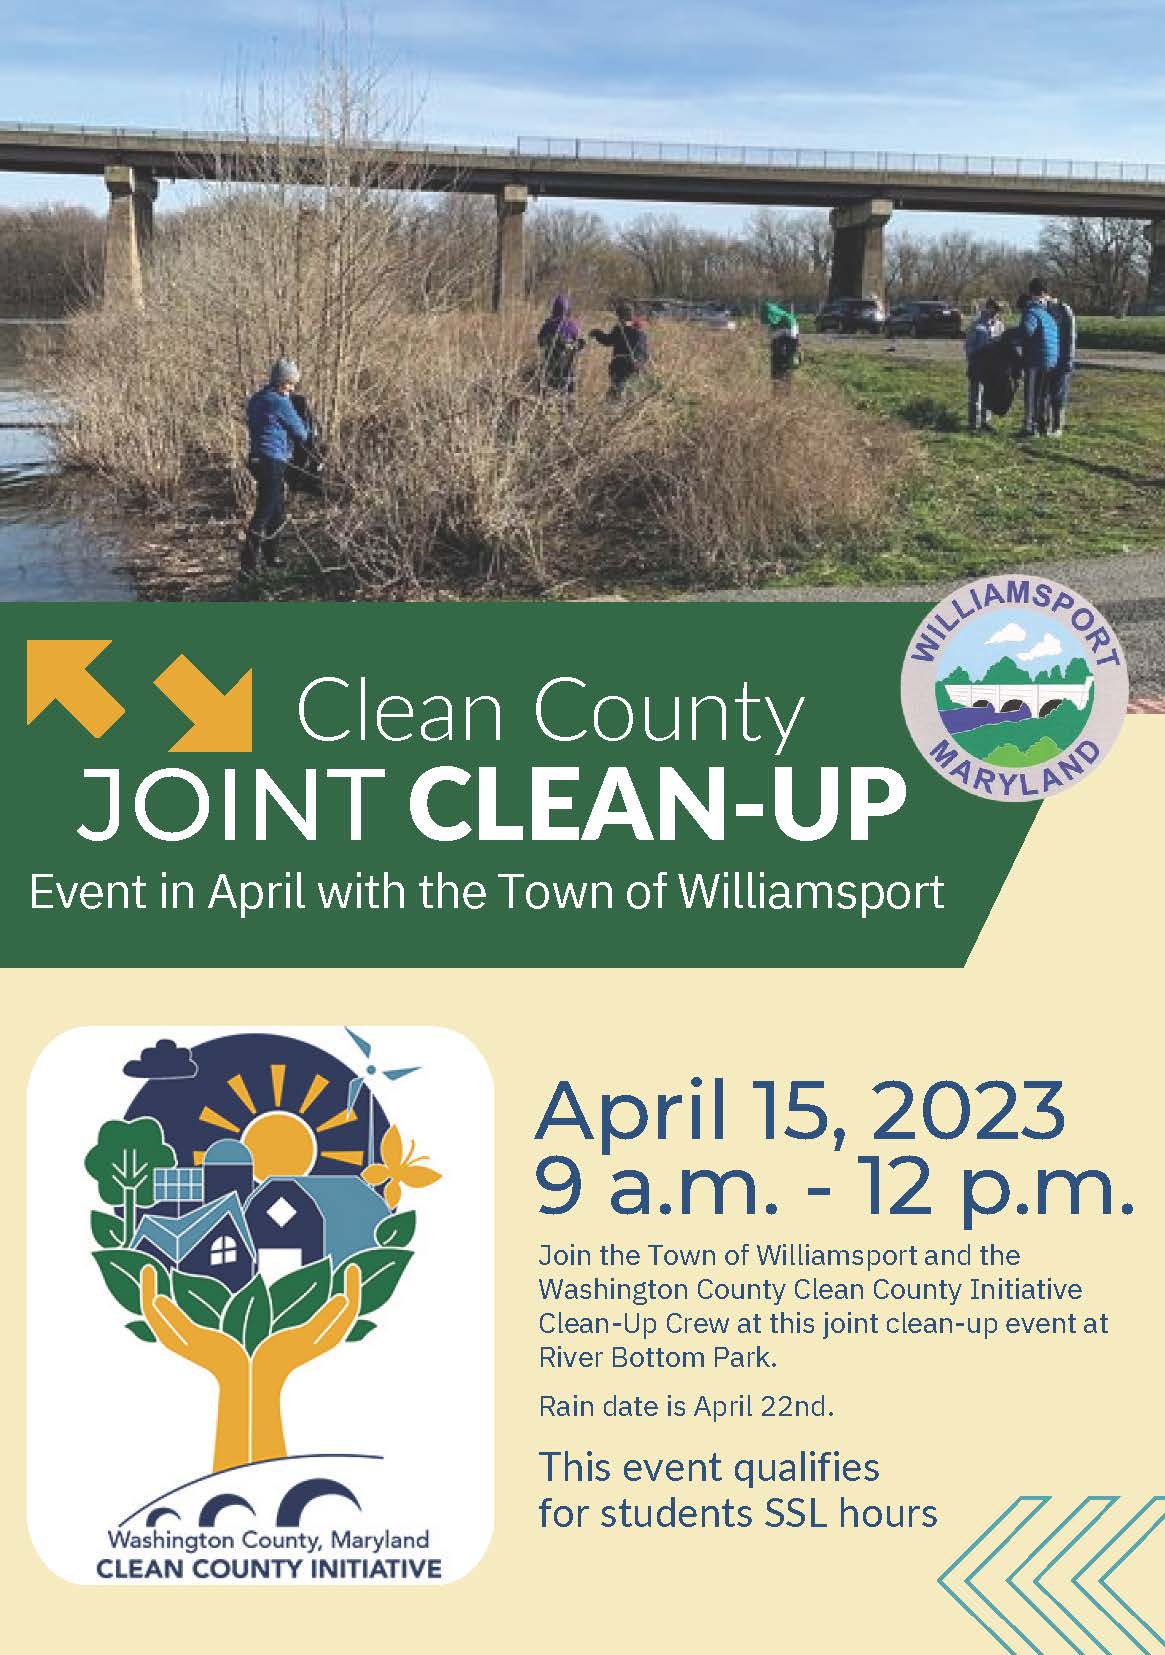 Clean County at River Bottom Park